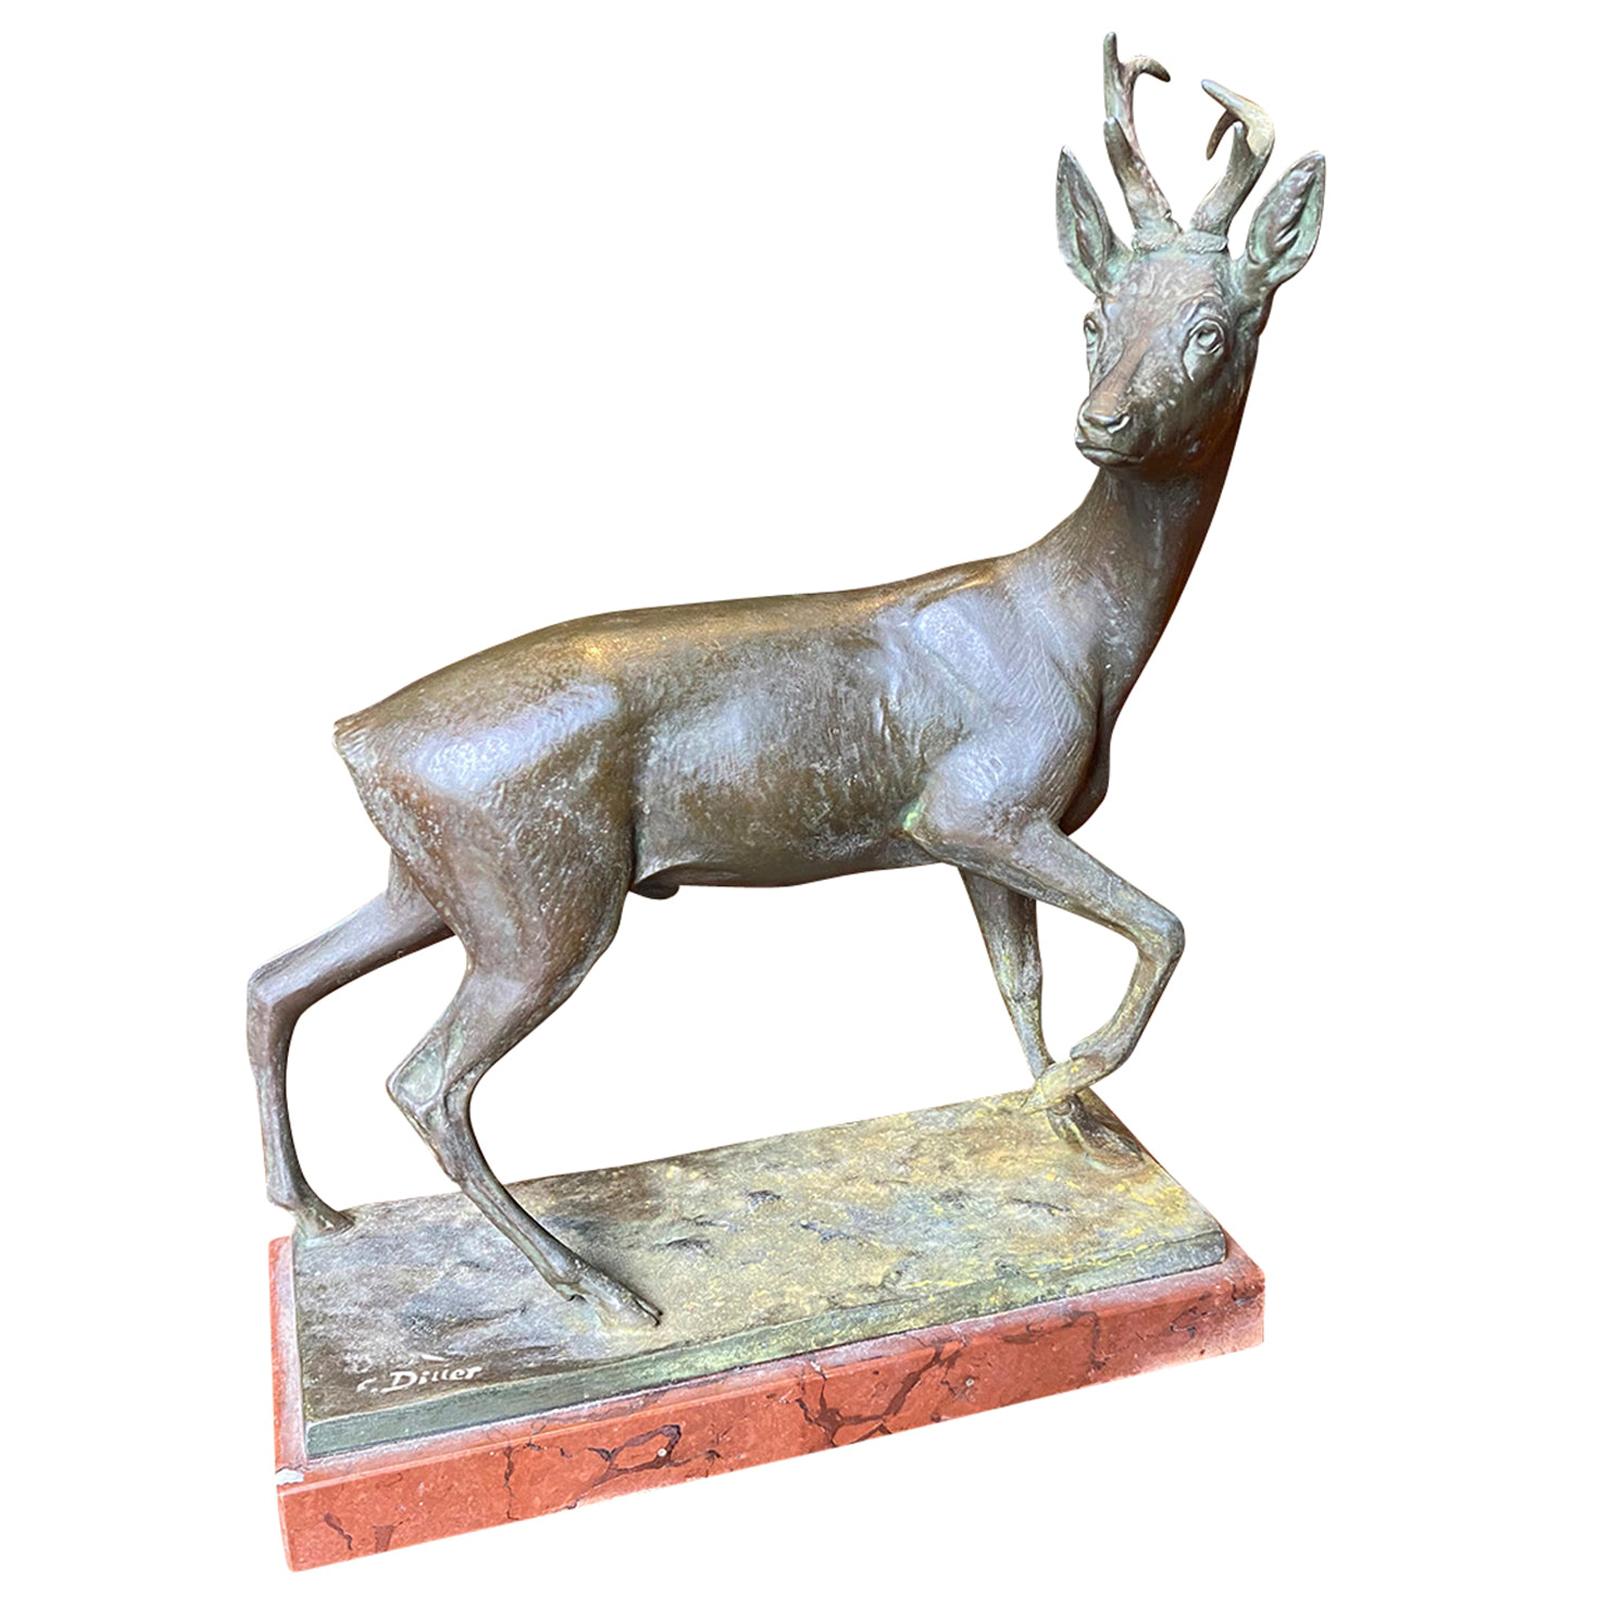 Signed C. Diller Cast Metal Statue of Stag / Deer, Late 19th-Early 20th Century